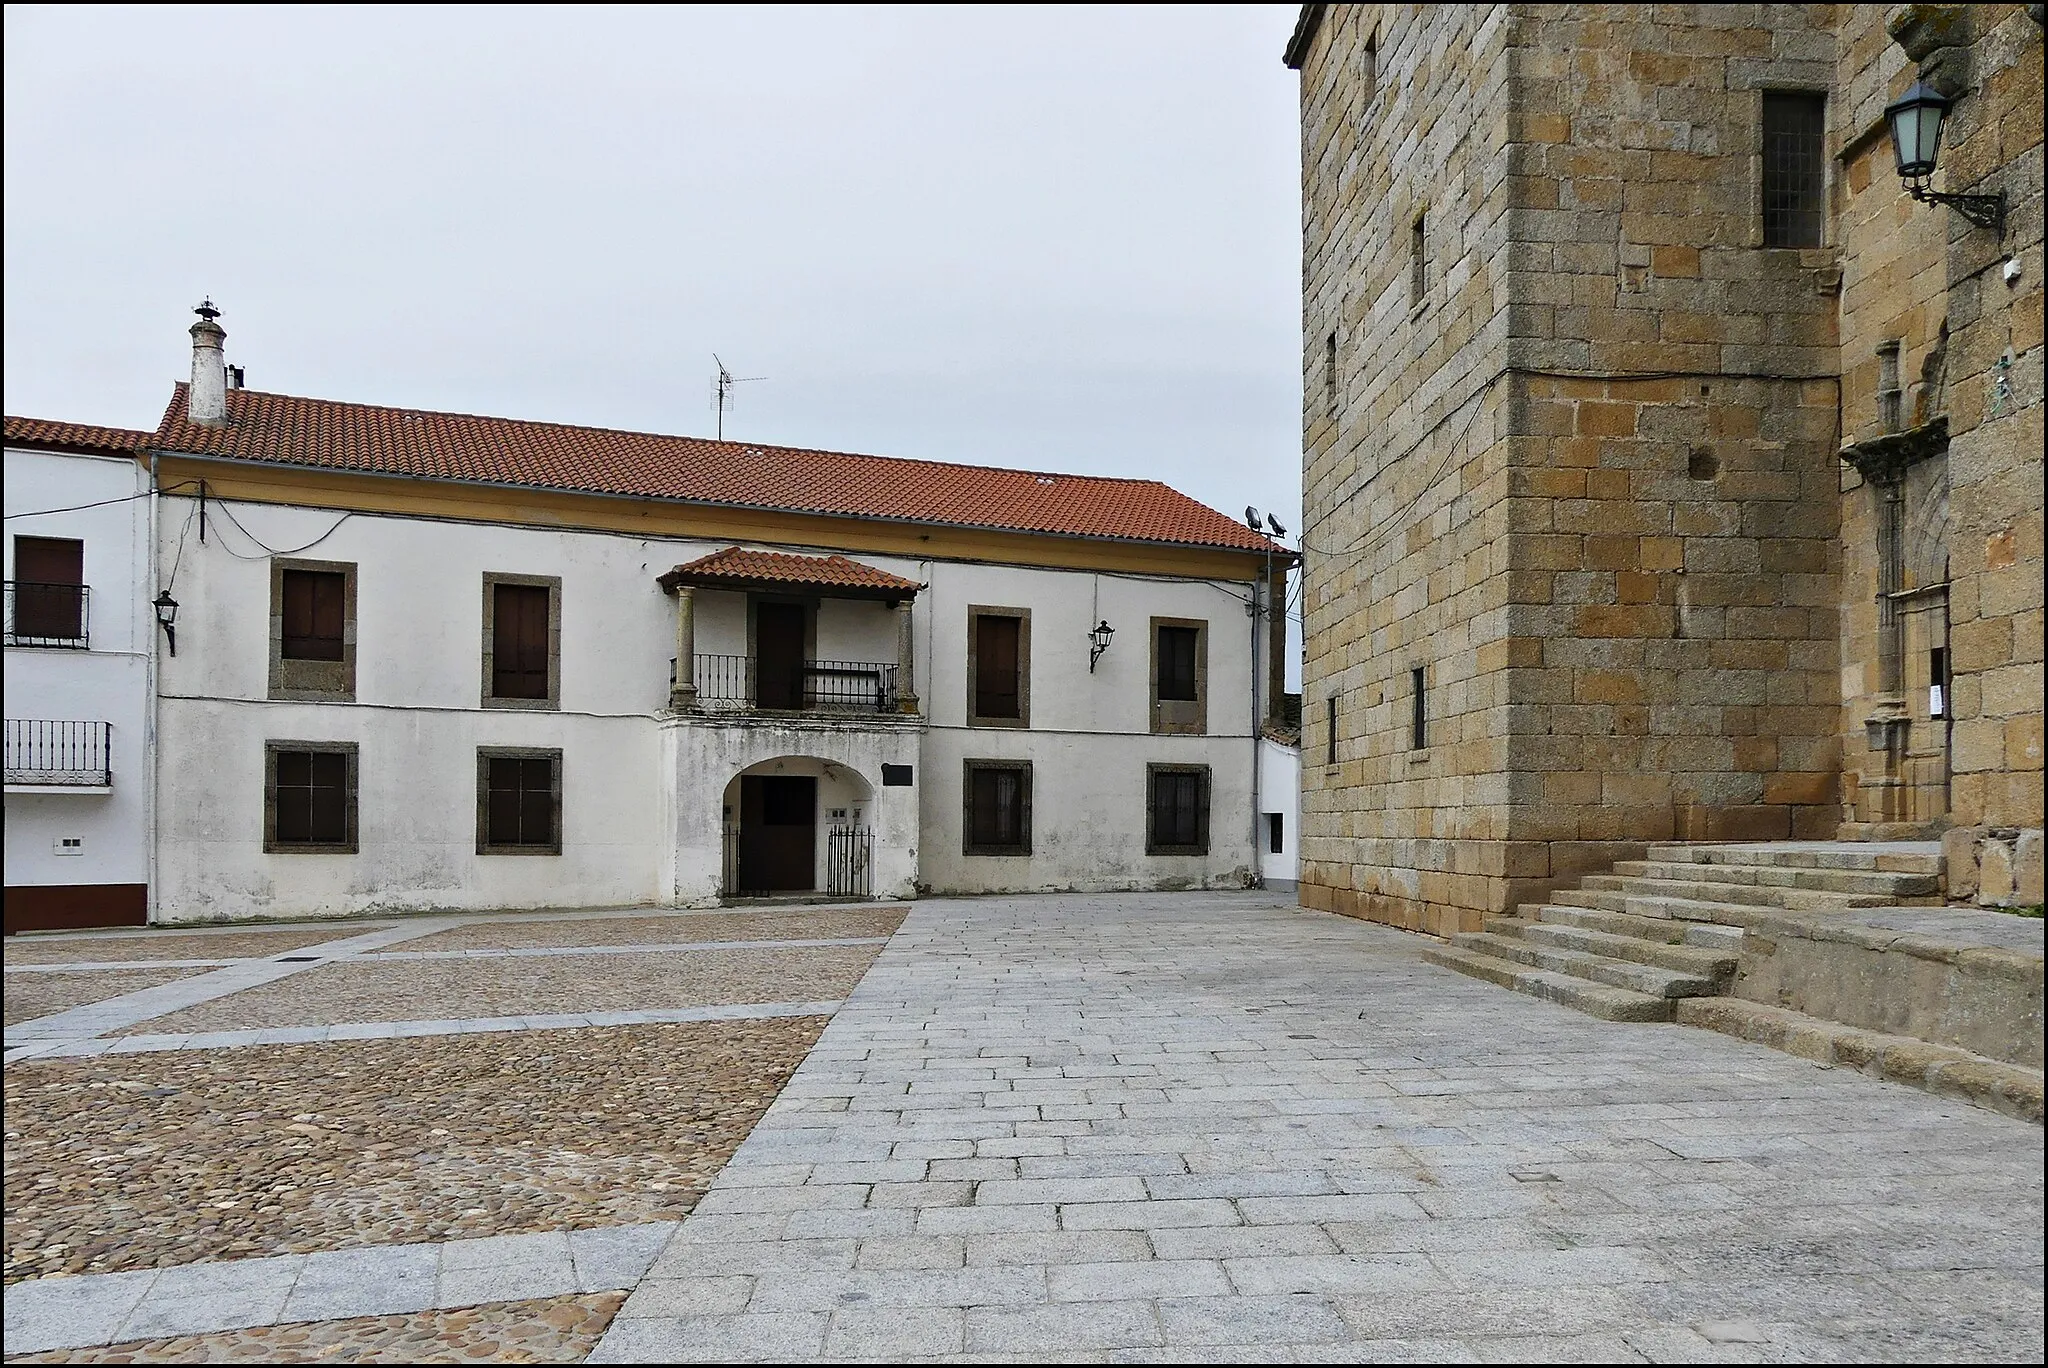 Photo showing: Wellington's headquarter on three occasions during the Peninsular War, between 1811 and 1812 : August to September 1811, November 1811, and April to June 1812.
Private property.

Location : Plaza de la Constitución, next to the entrance to the church San Juan Bautista.